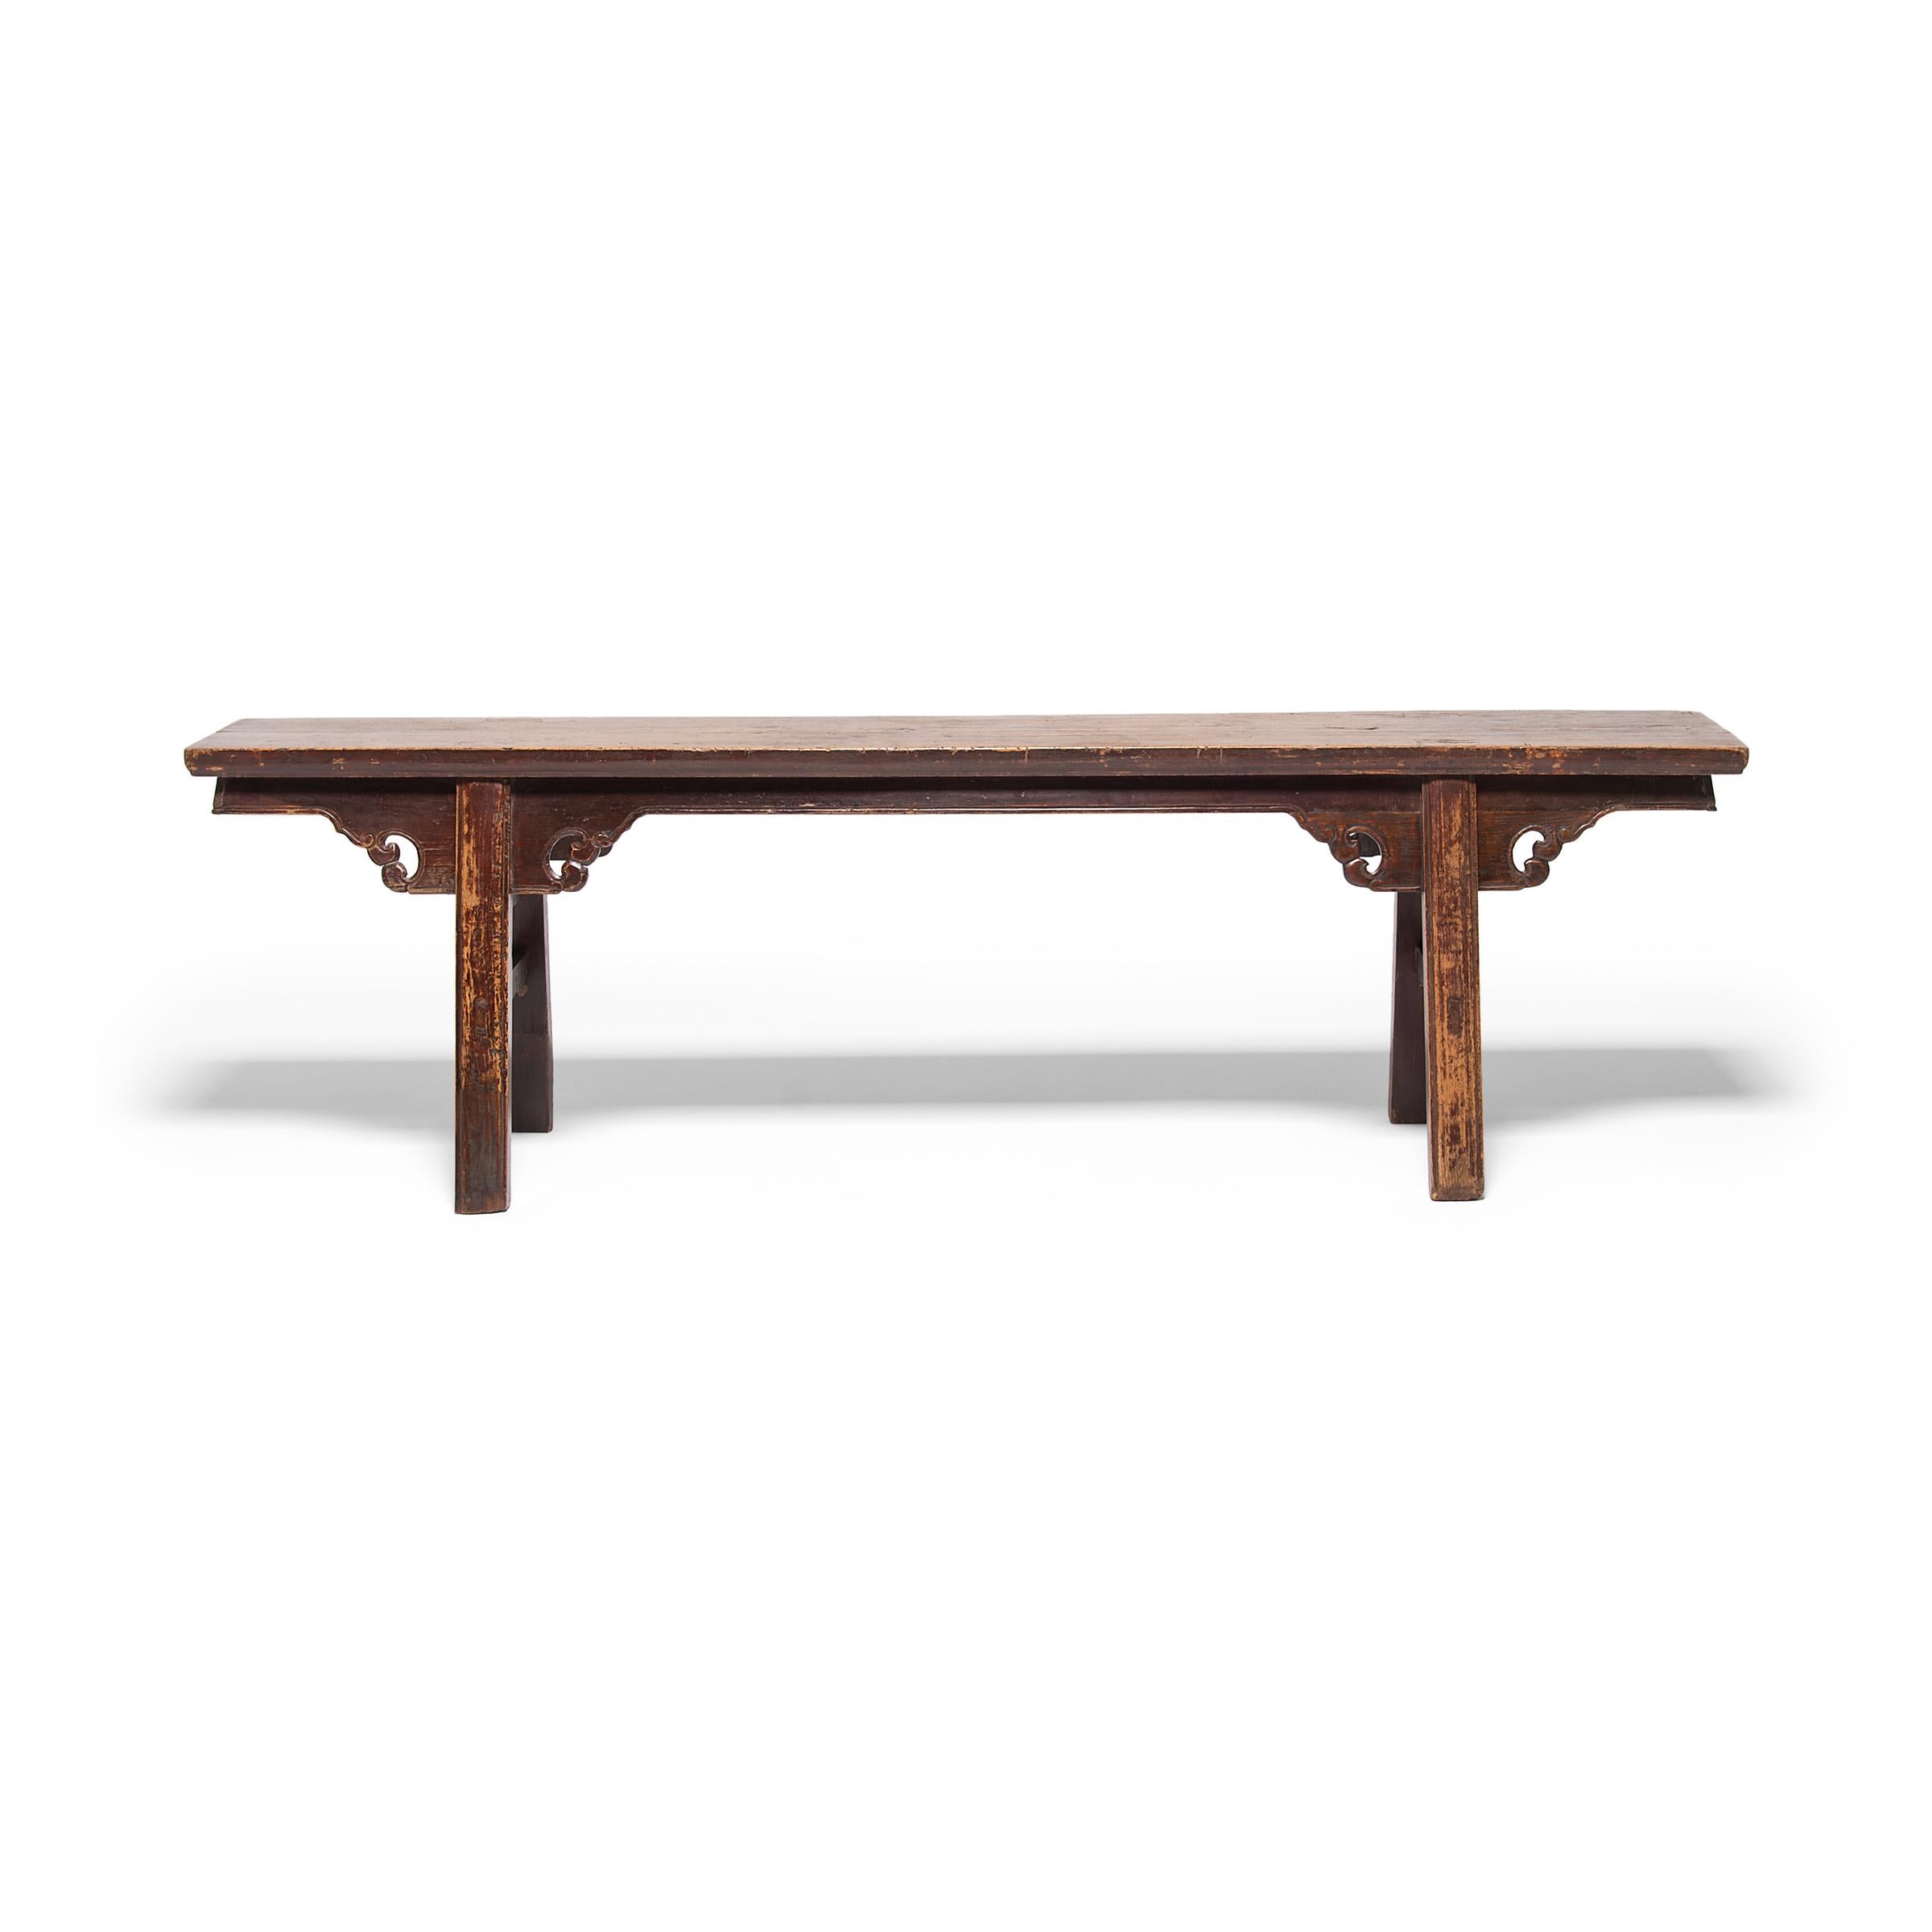 In most Qing dynasty homes, stools and chairs were the only form of elevated seating, and a bench such as this would have been found at a temple or public theater. This 19th century walnut bench has splayed legs linked by straight double stretchers